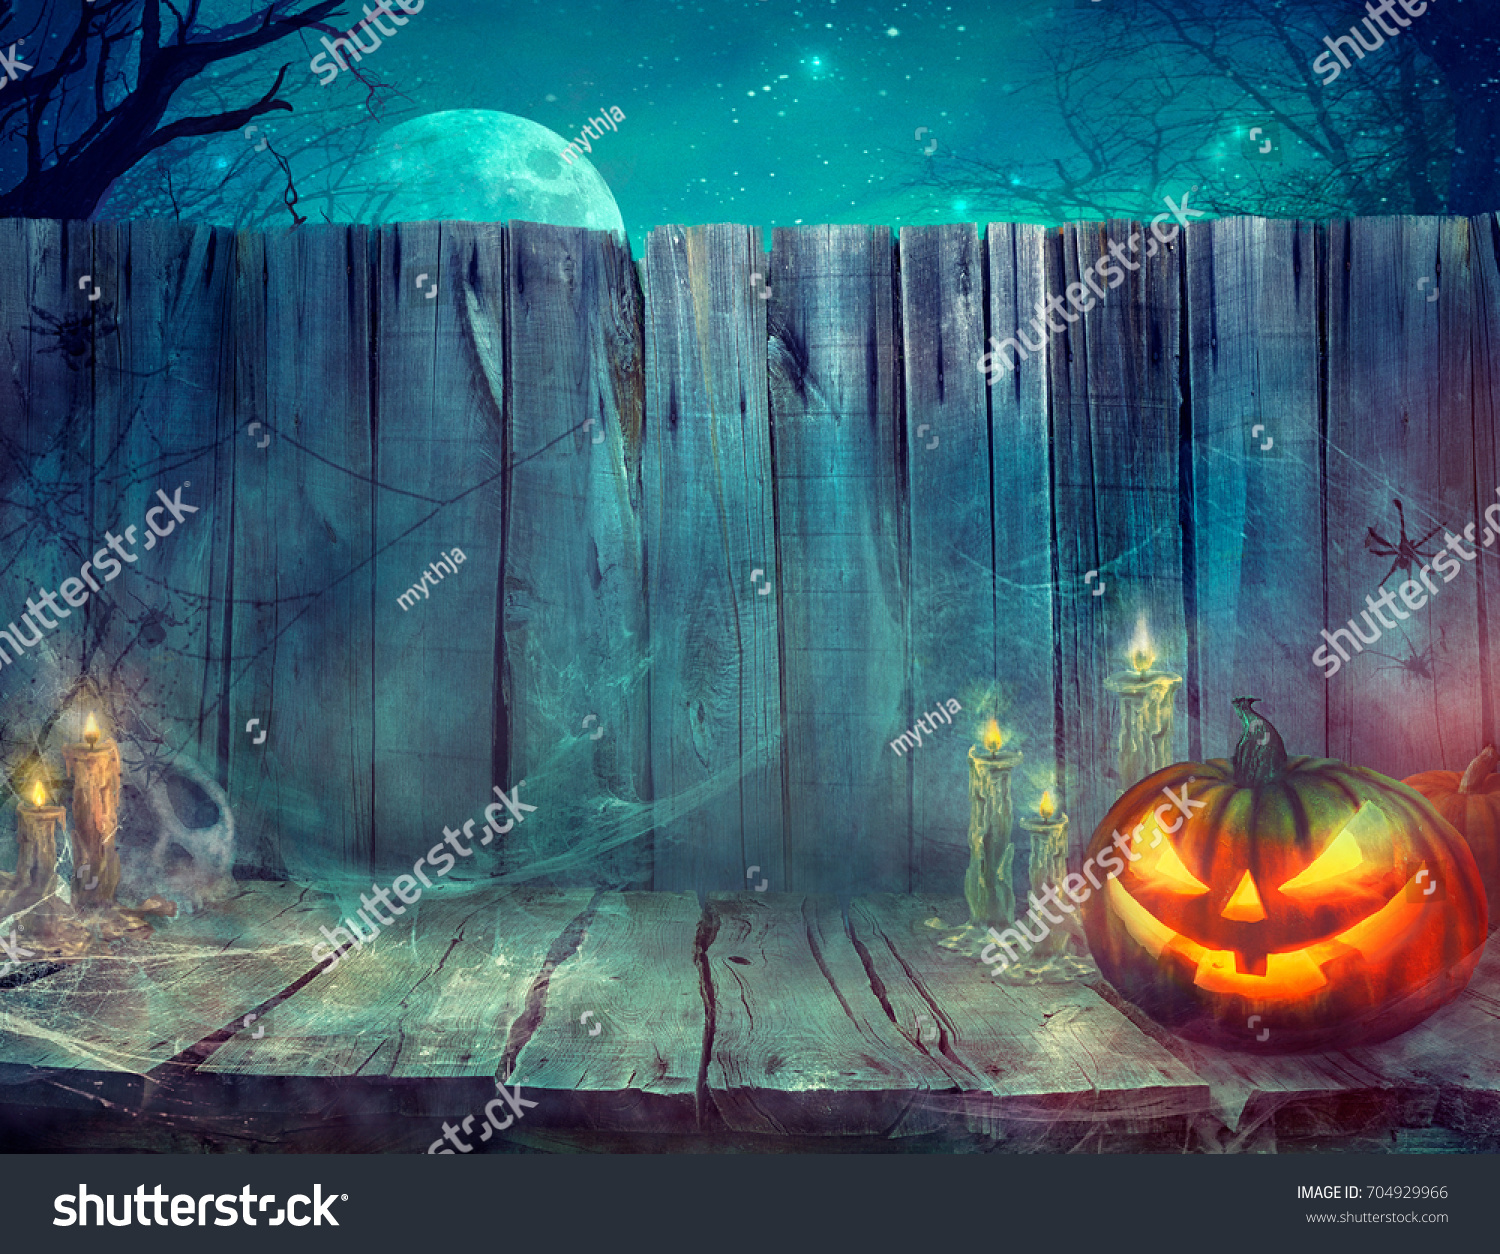 Halloween background. Spooky pumpkin on table. Halloween design with pumpkins and skull #704929966